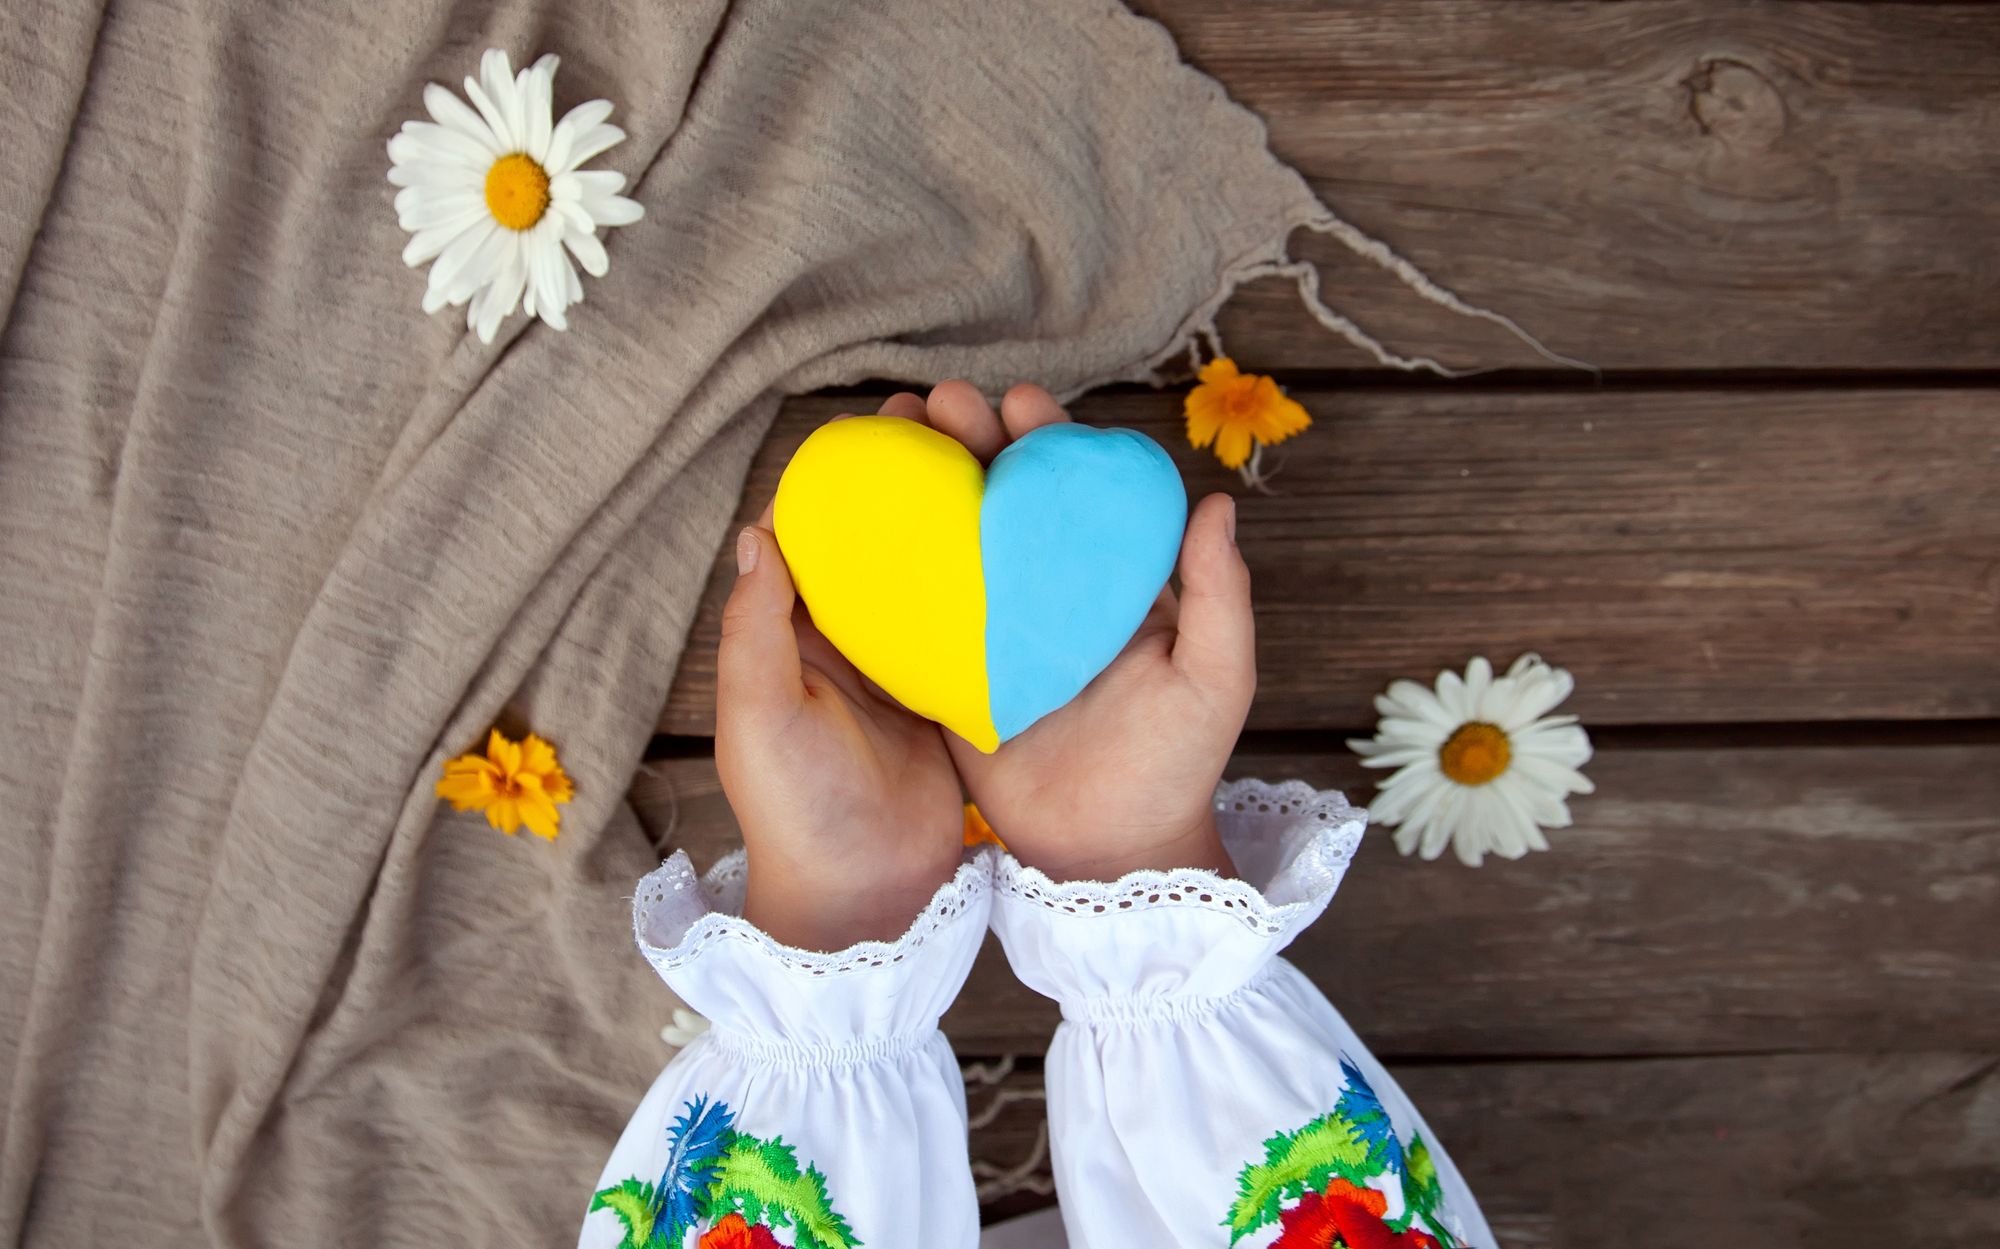 A yellow and blue heart in the hands of a child in an embroidered shirt, against the background of a rough wooden table.